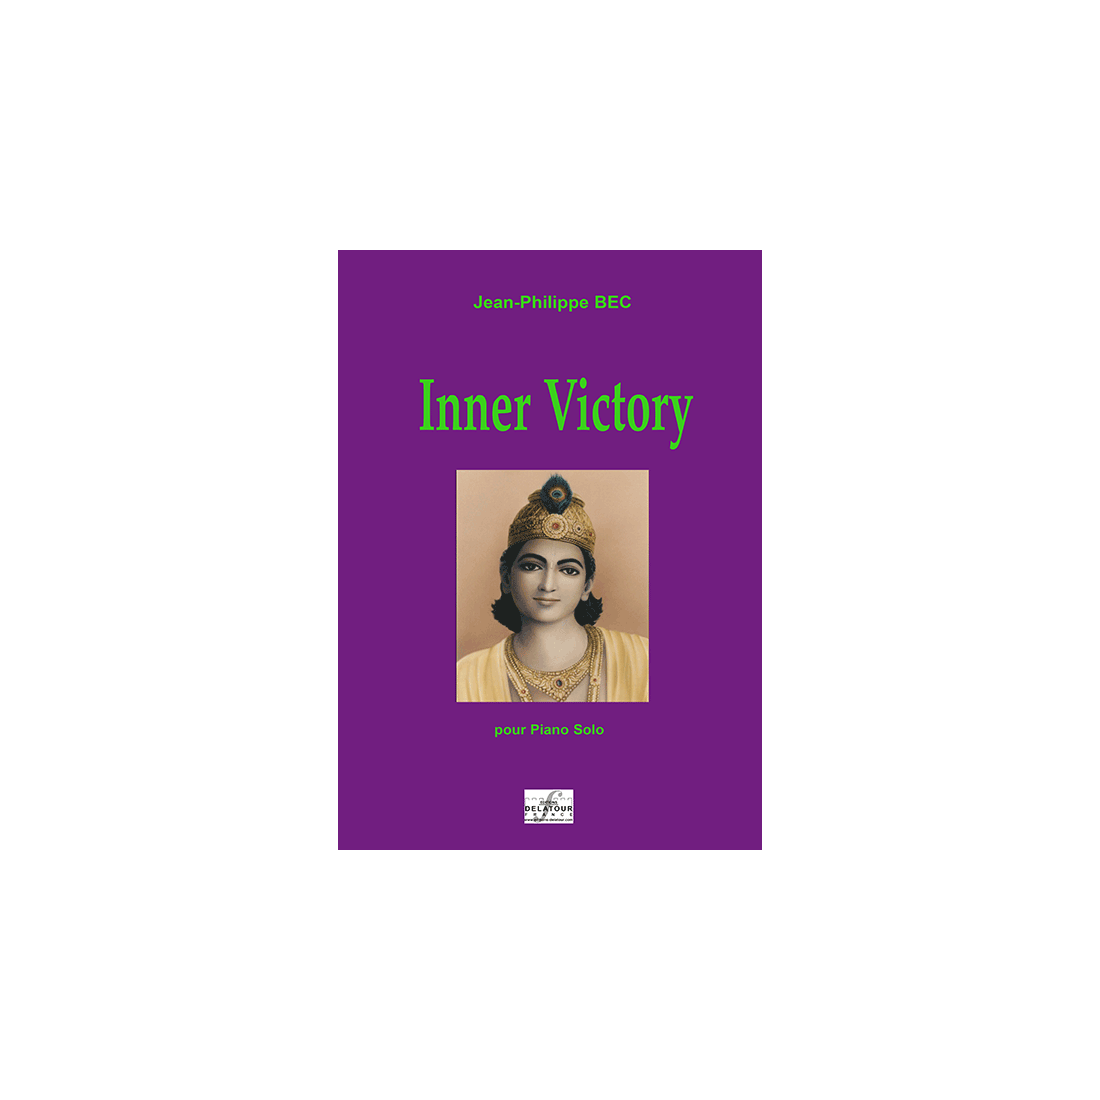 Inner-victory pour piano